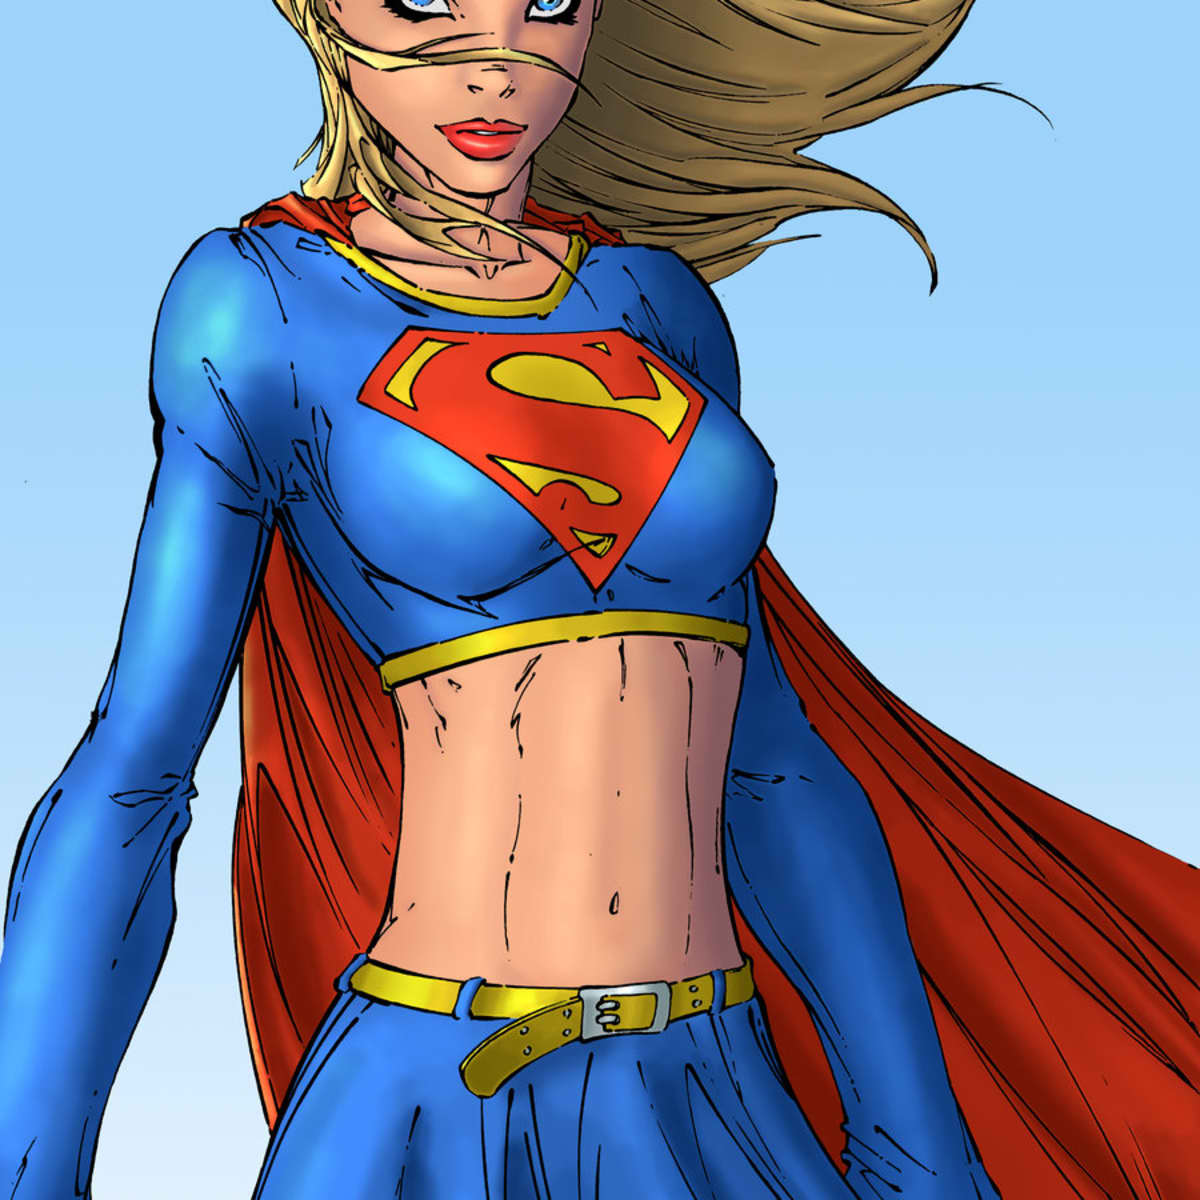 The Hottest Blonde Girls in Comics!